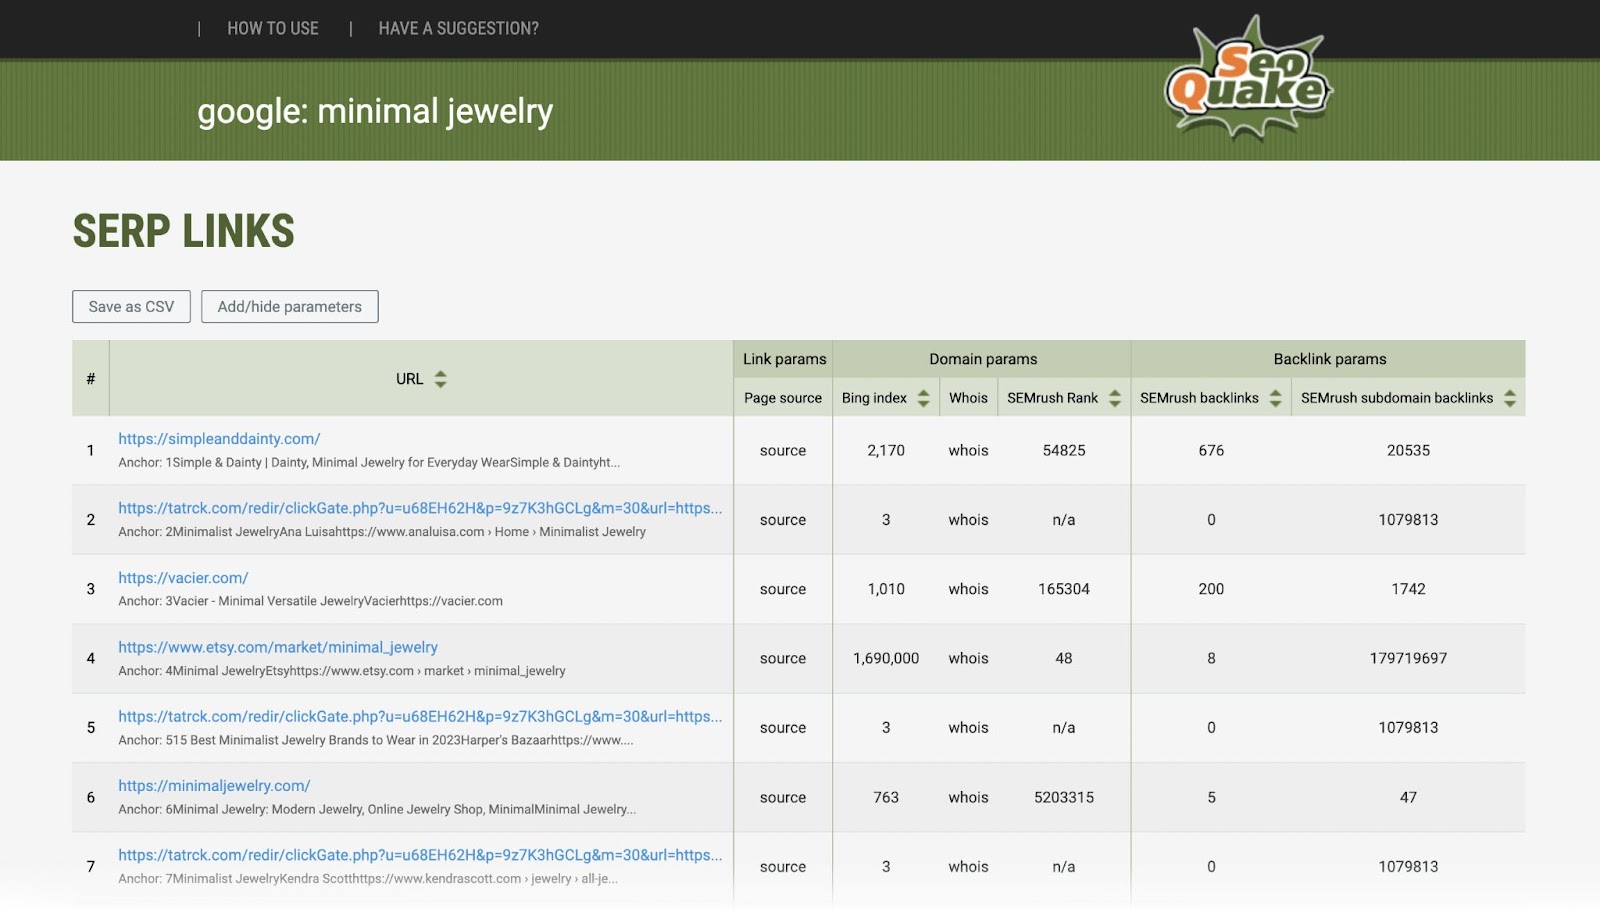 "SERP LINKS" report for "google: minimal jewelry"